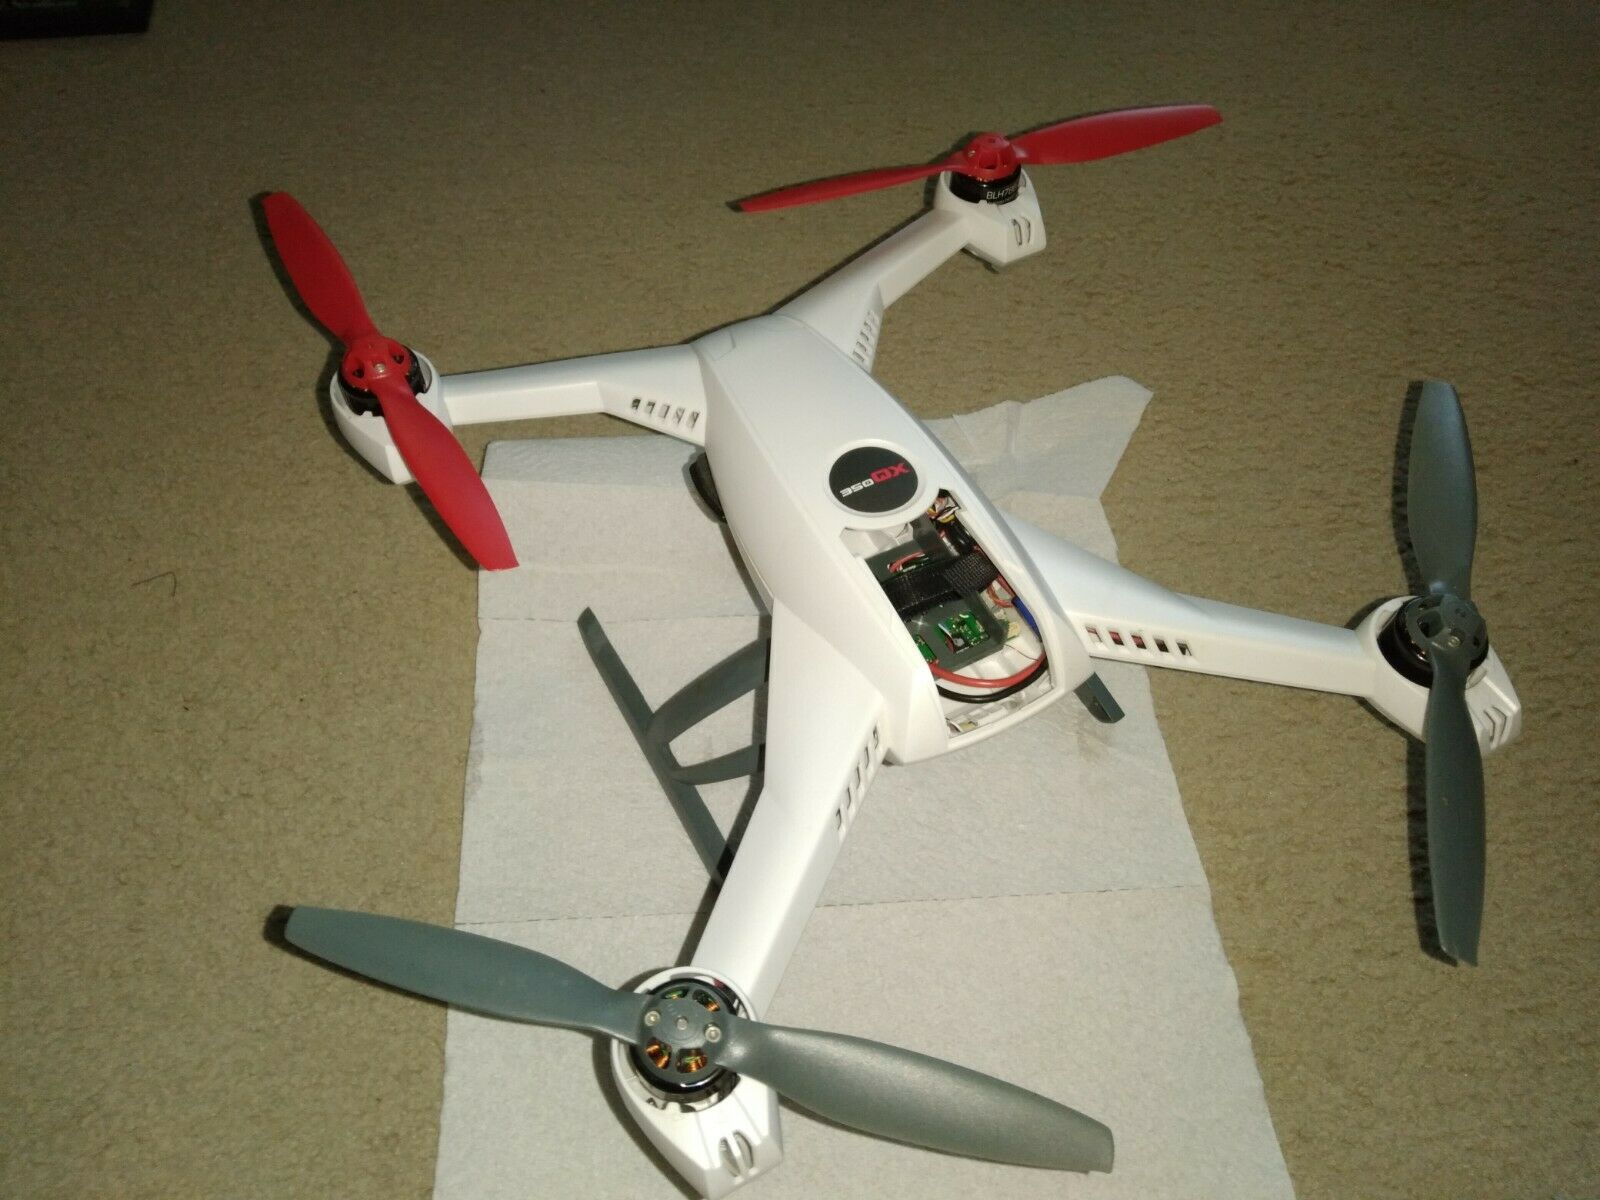 Horizon Hobby Blade 350qx Quadcopter Drone For Parts Incomplete Works